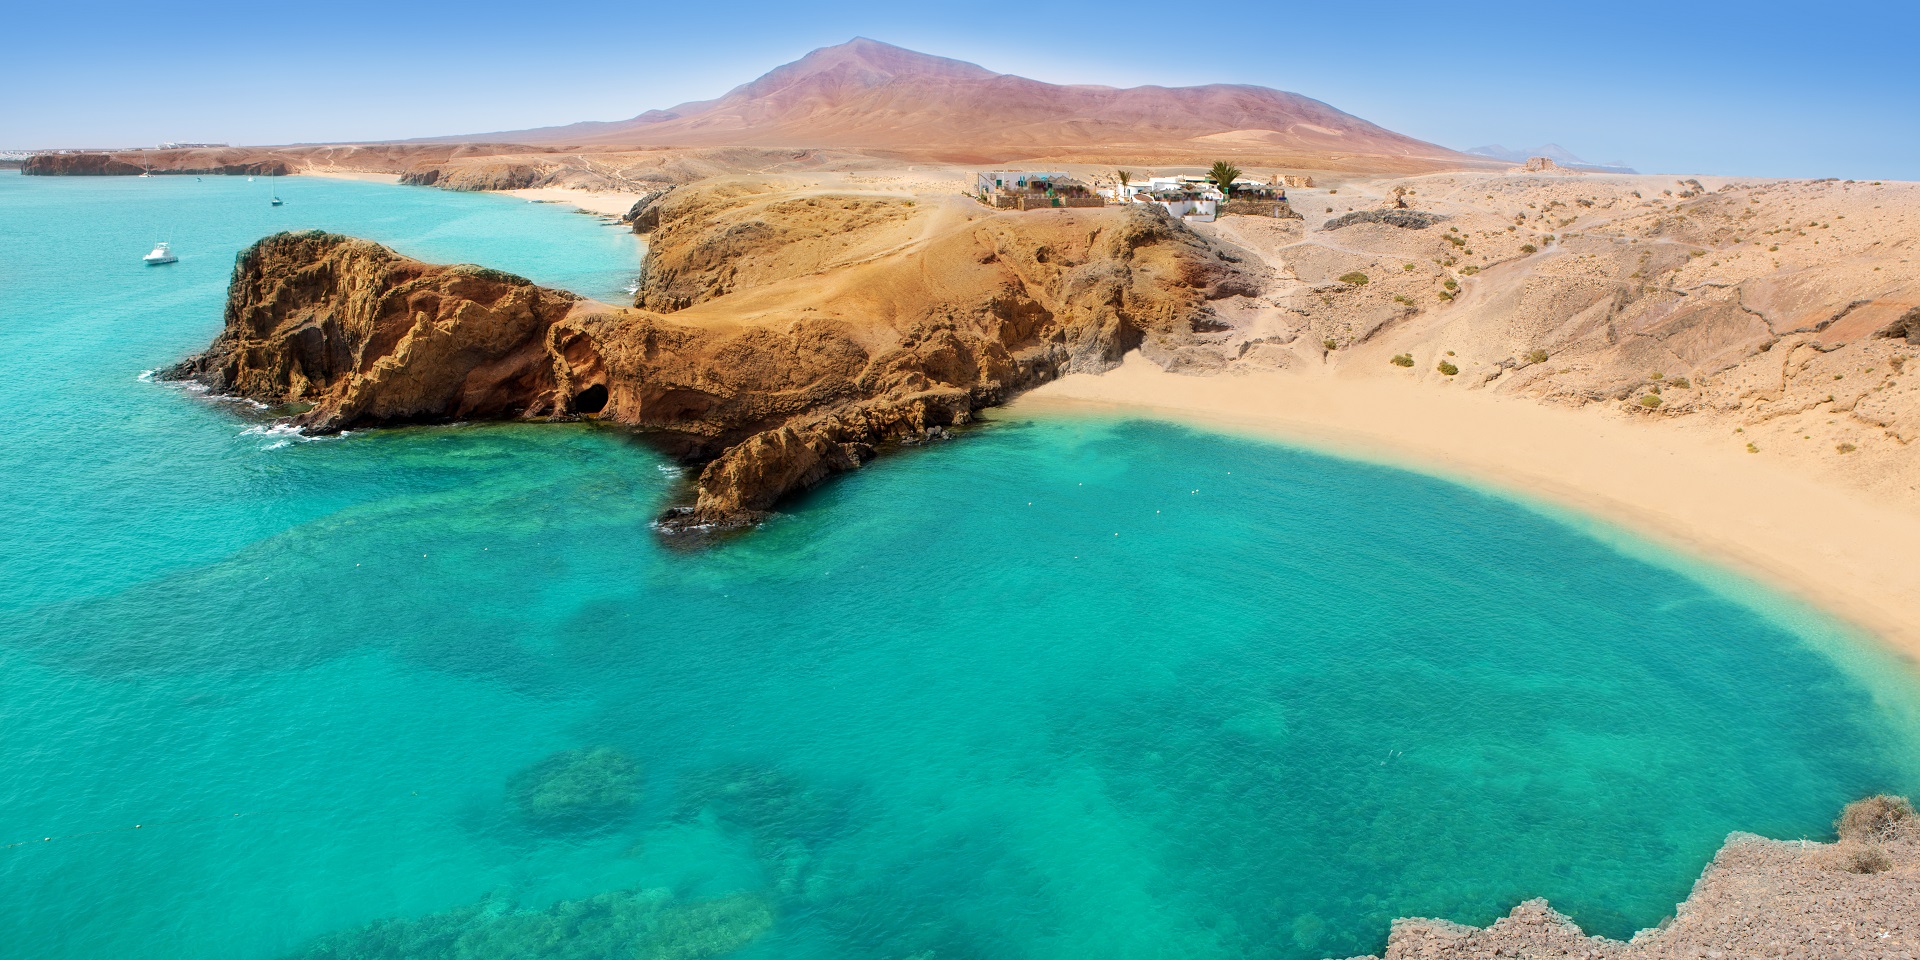 Beach in Lanzarote, Canary Islands of Spain